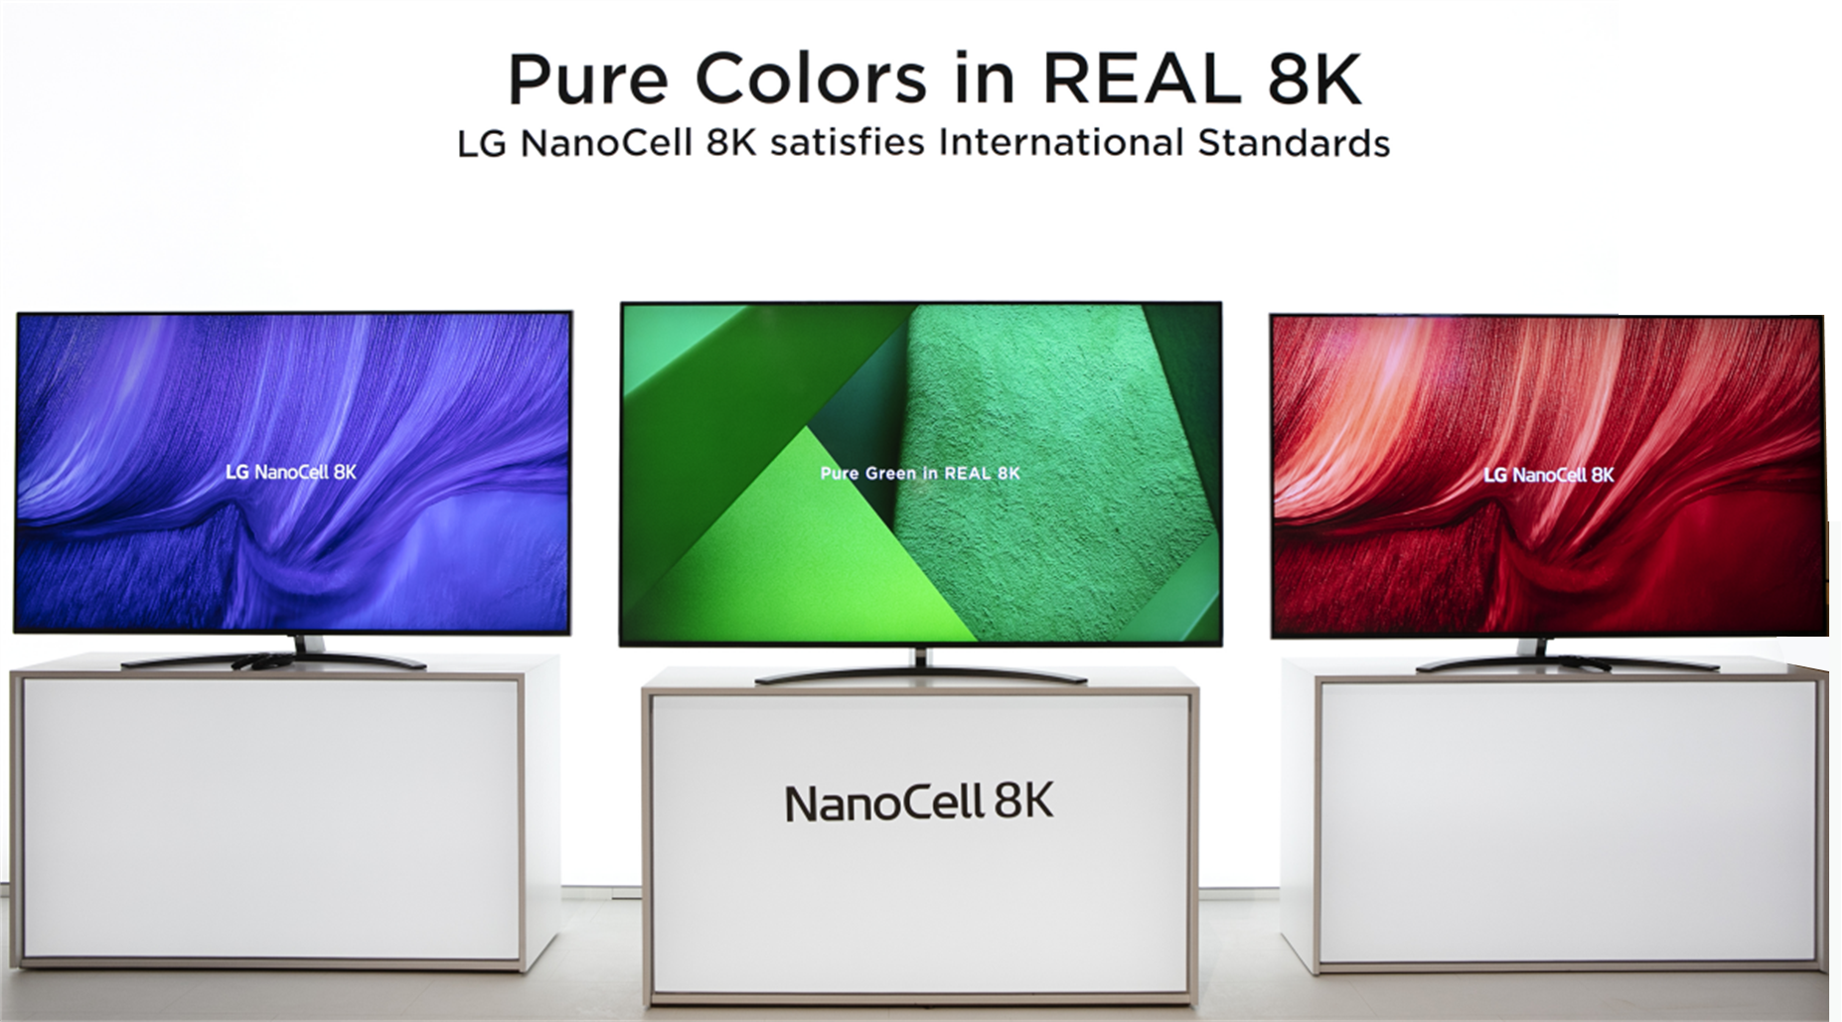 A concept image of the LG NanoCell 8K TVs that claims the TV satisfies international standards